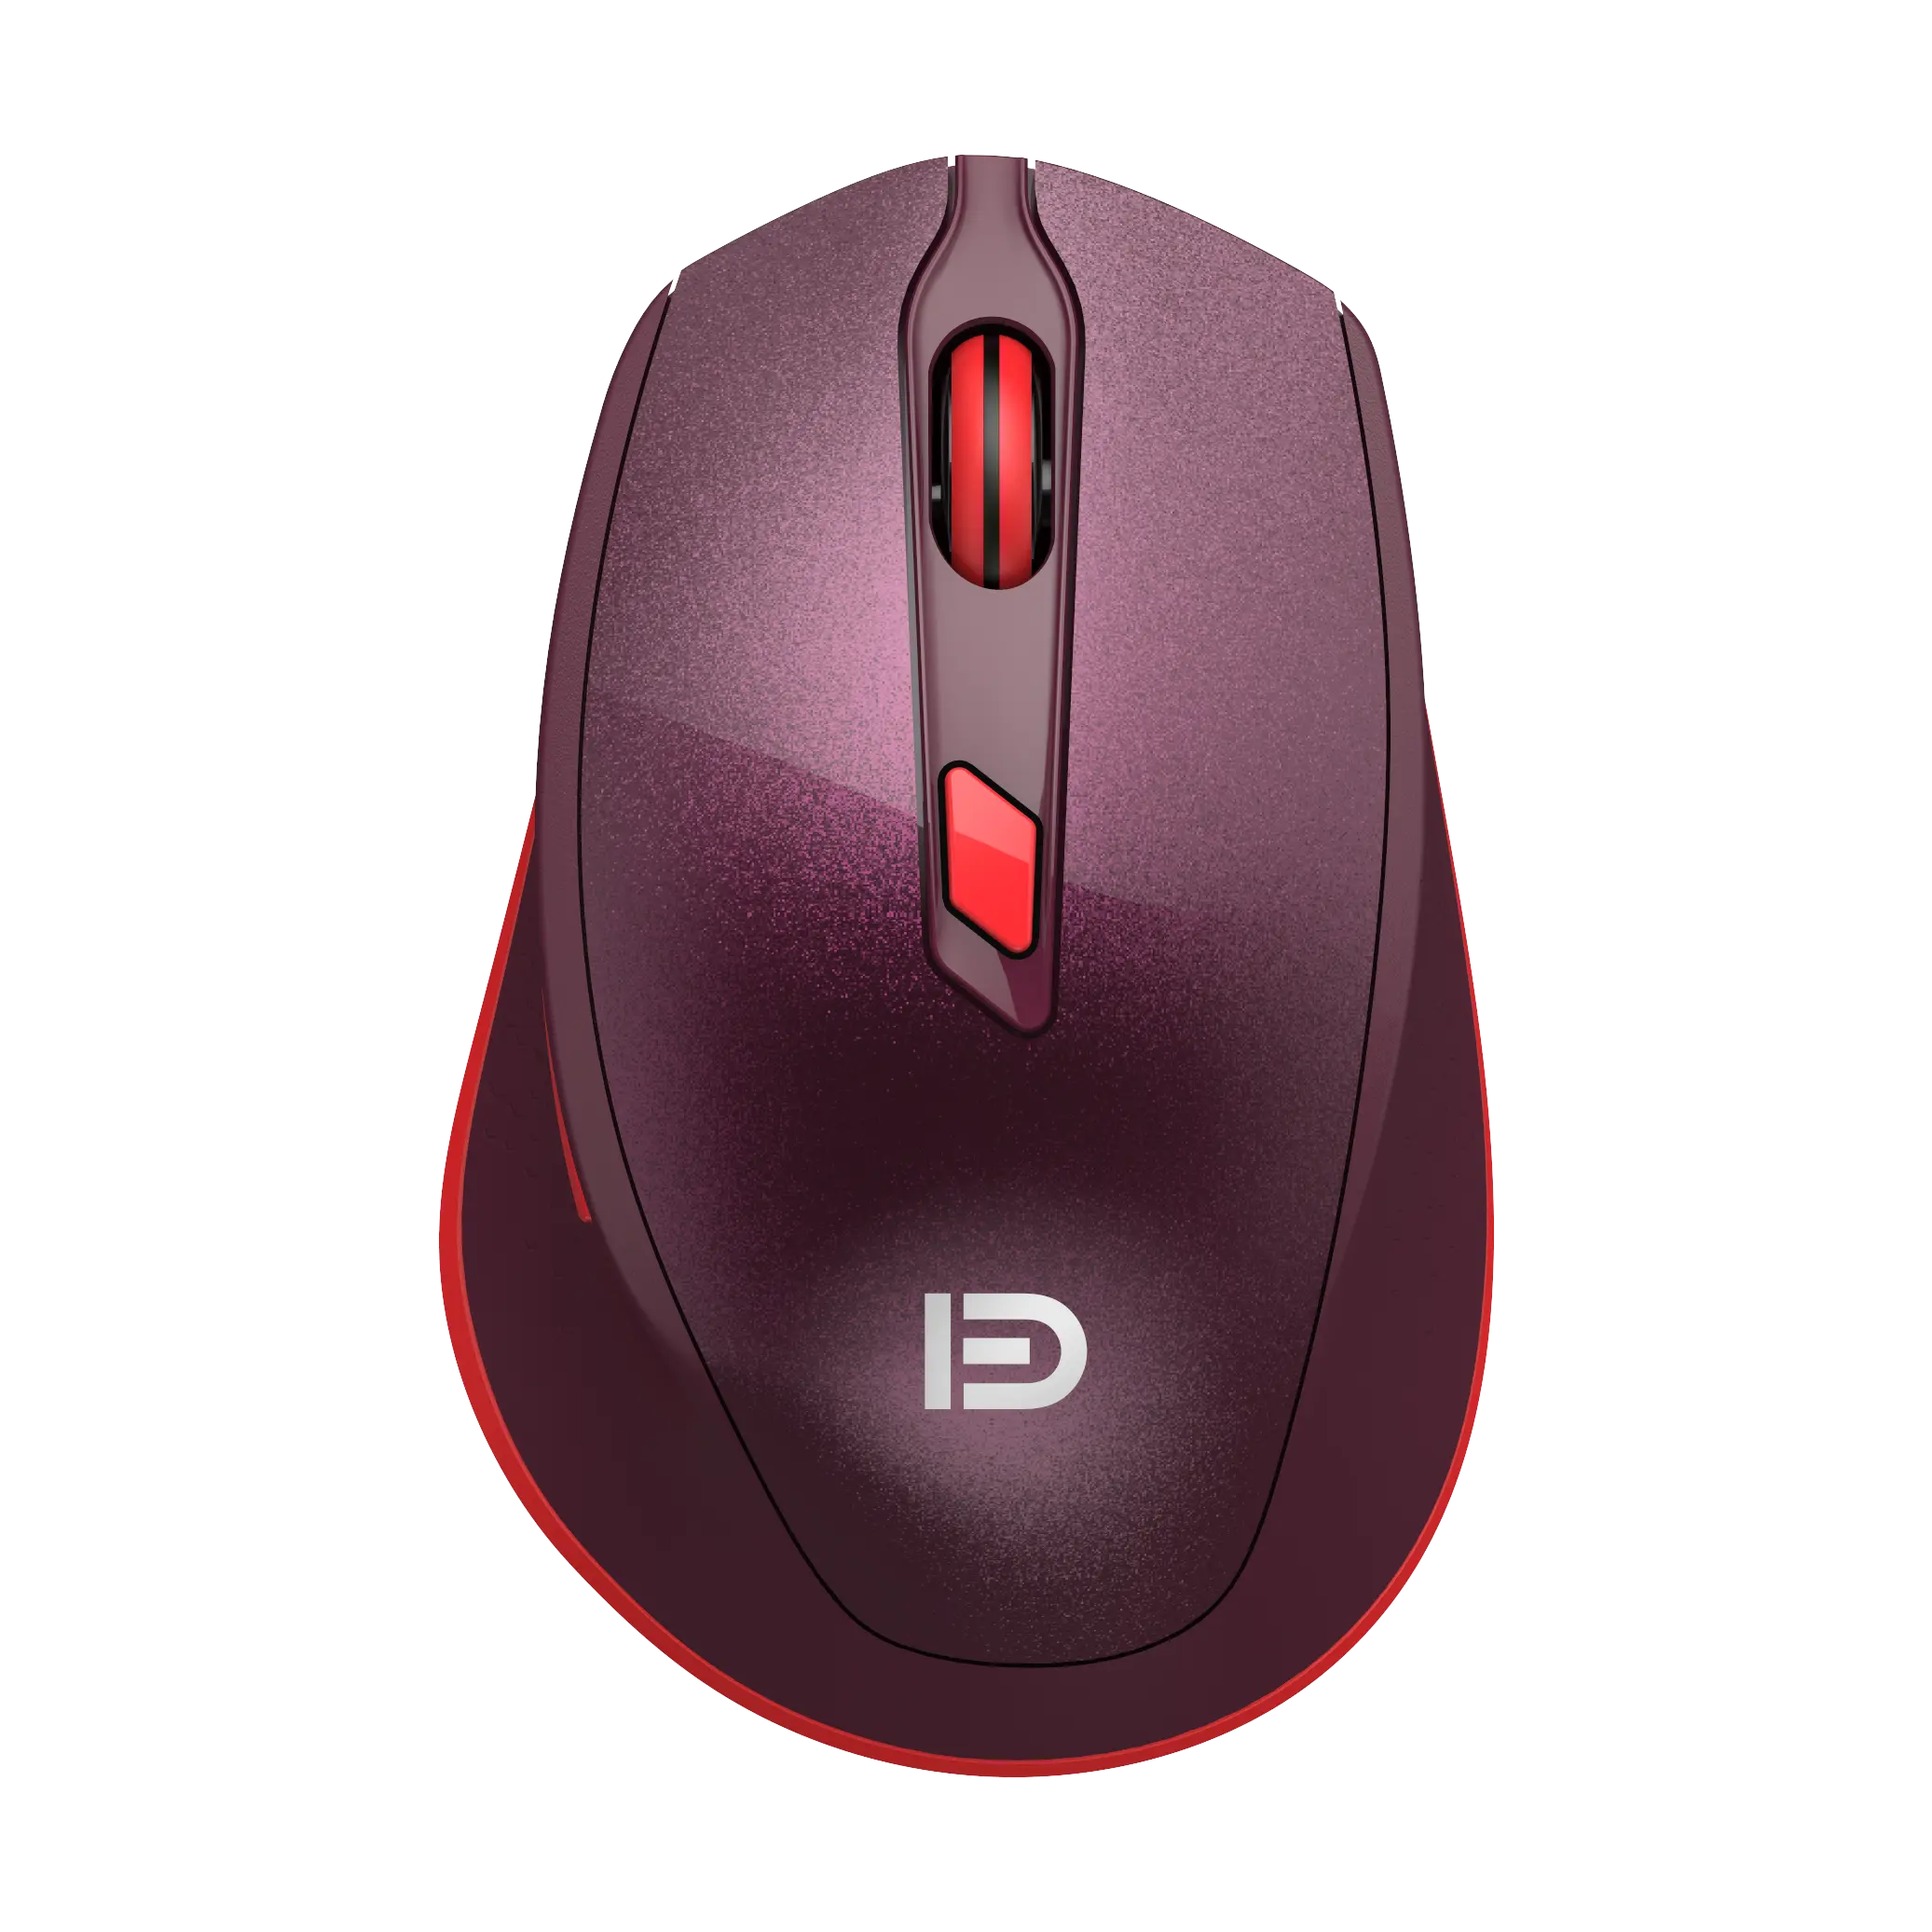 FD OEM i365 Red 2.4ghz Wireless Mouse with Wireless Mouse for Laptop Wireless Mousewireless